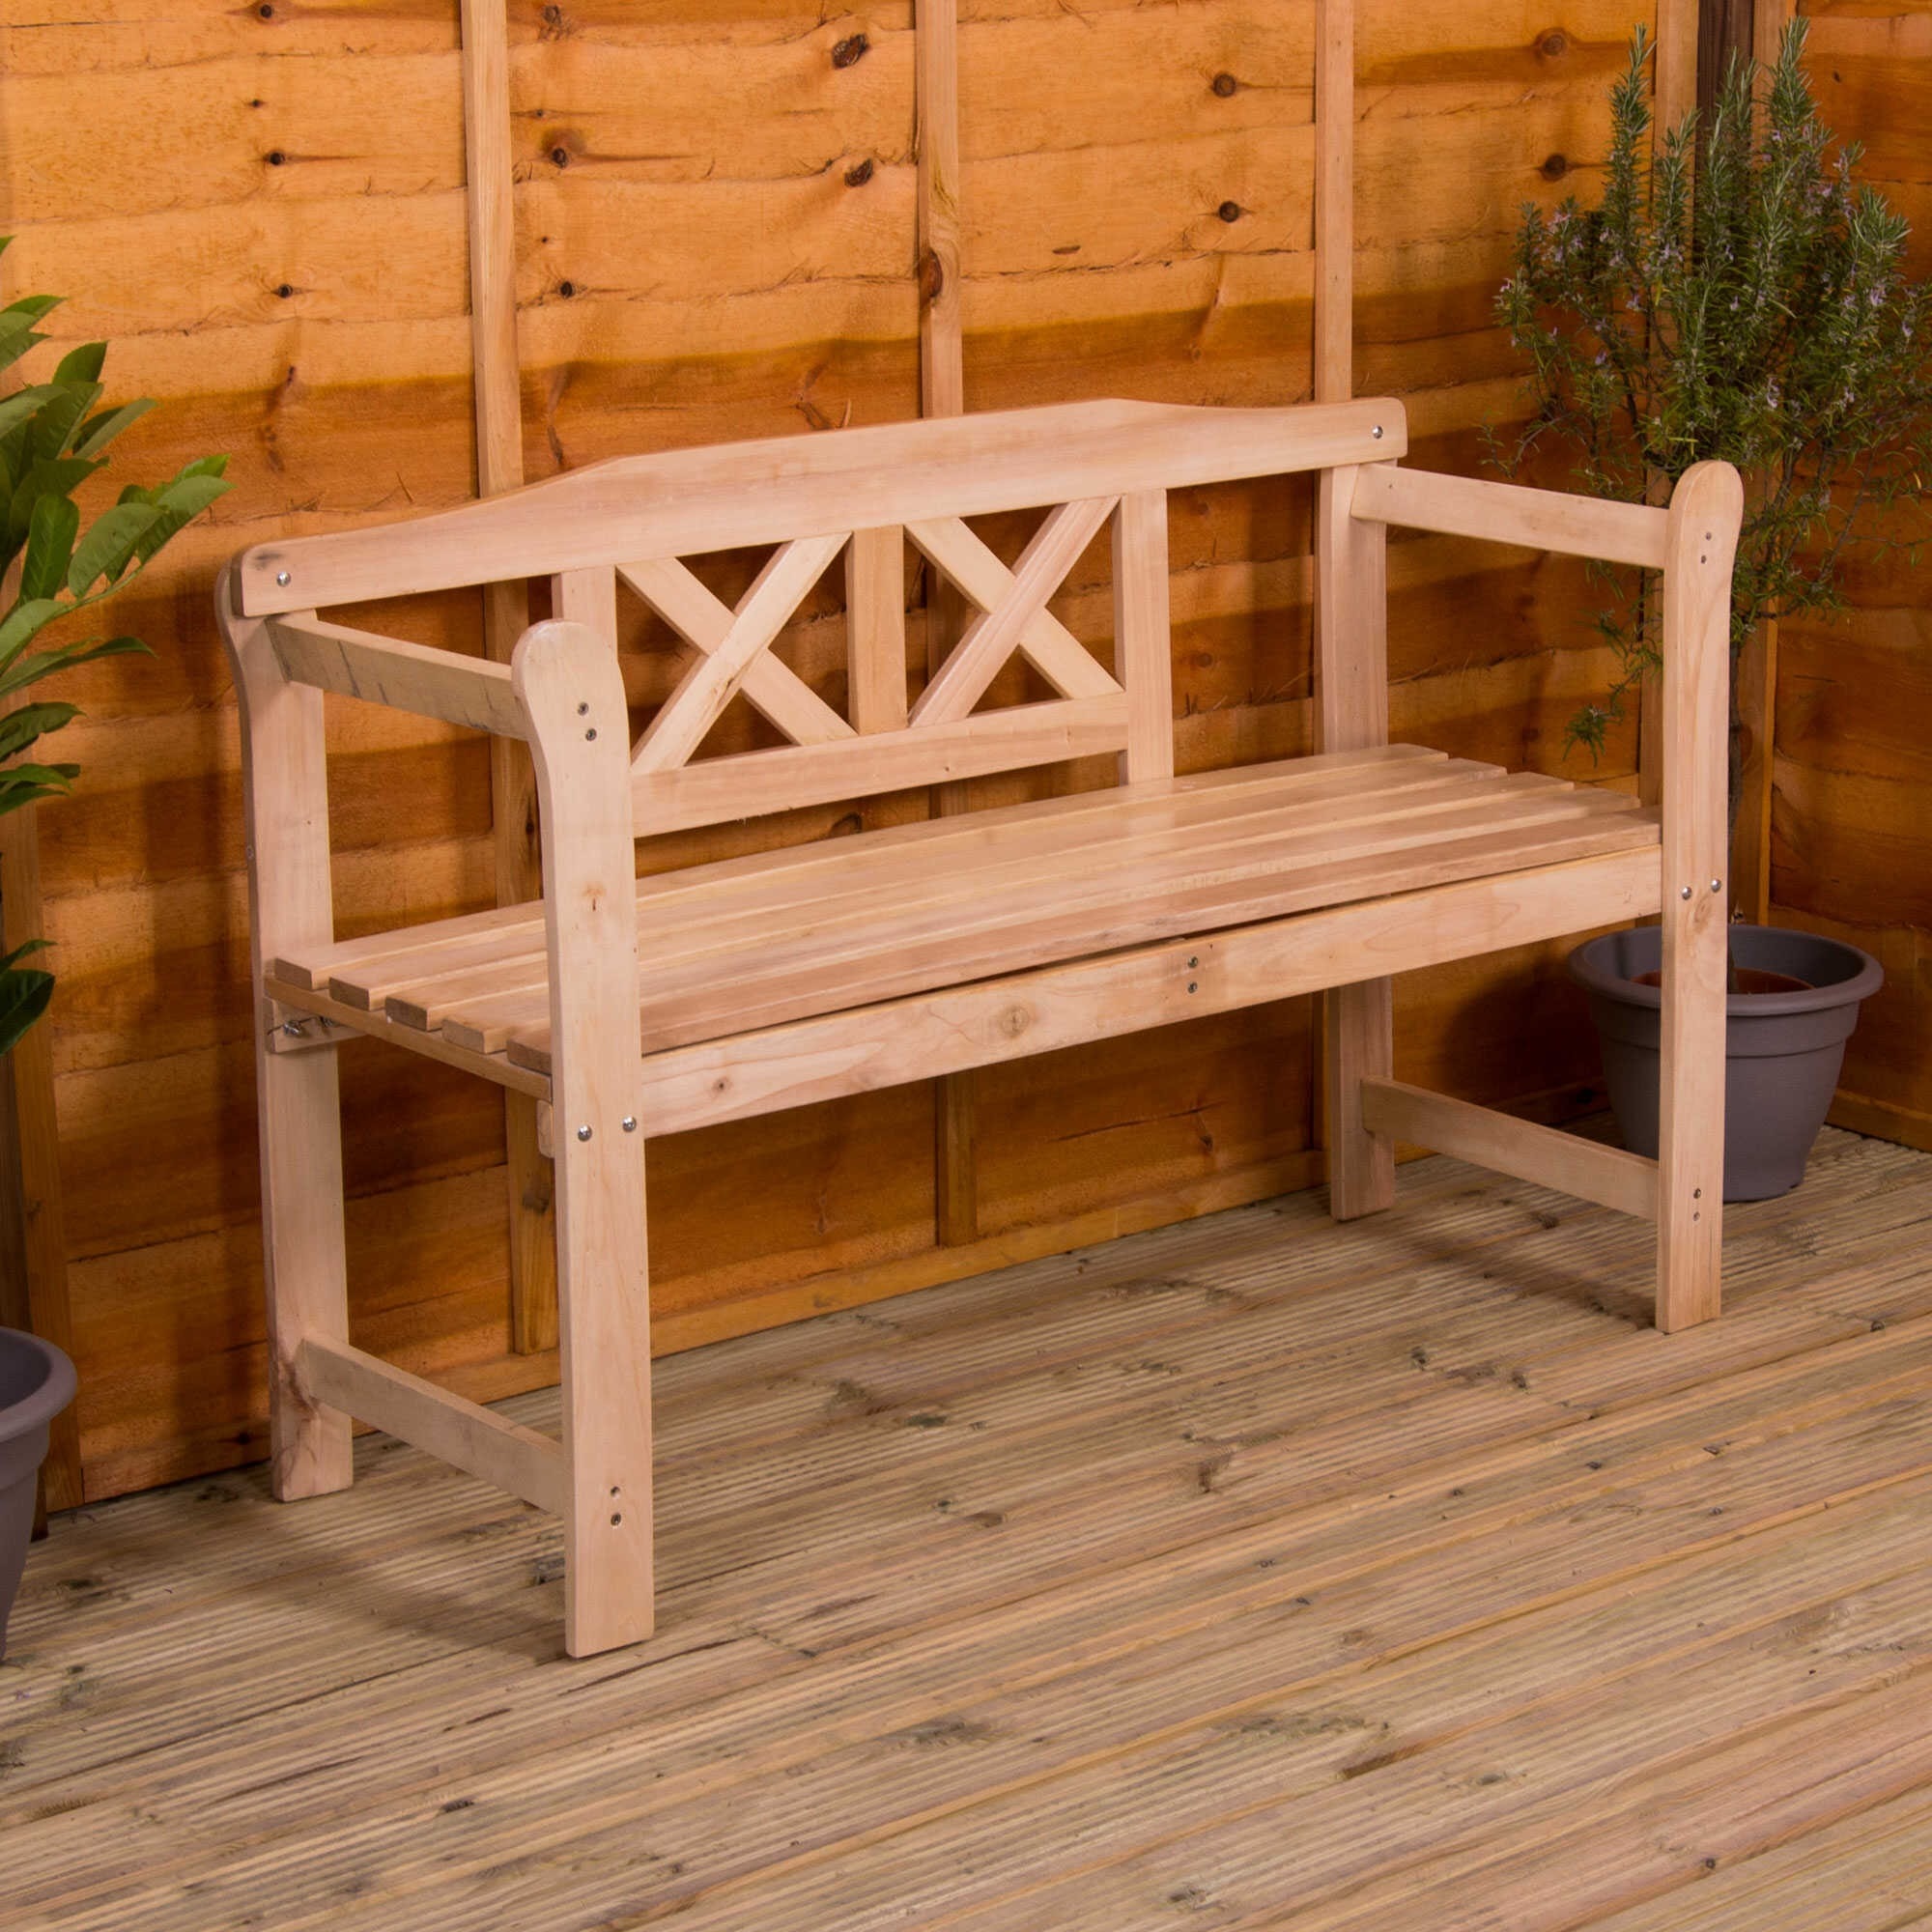 Stylish Simple Wooden Bench